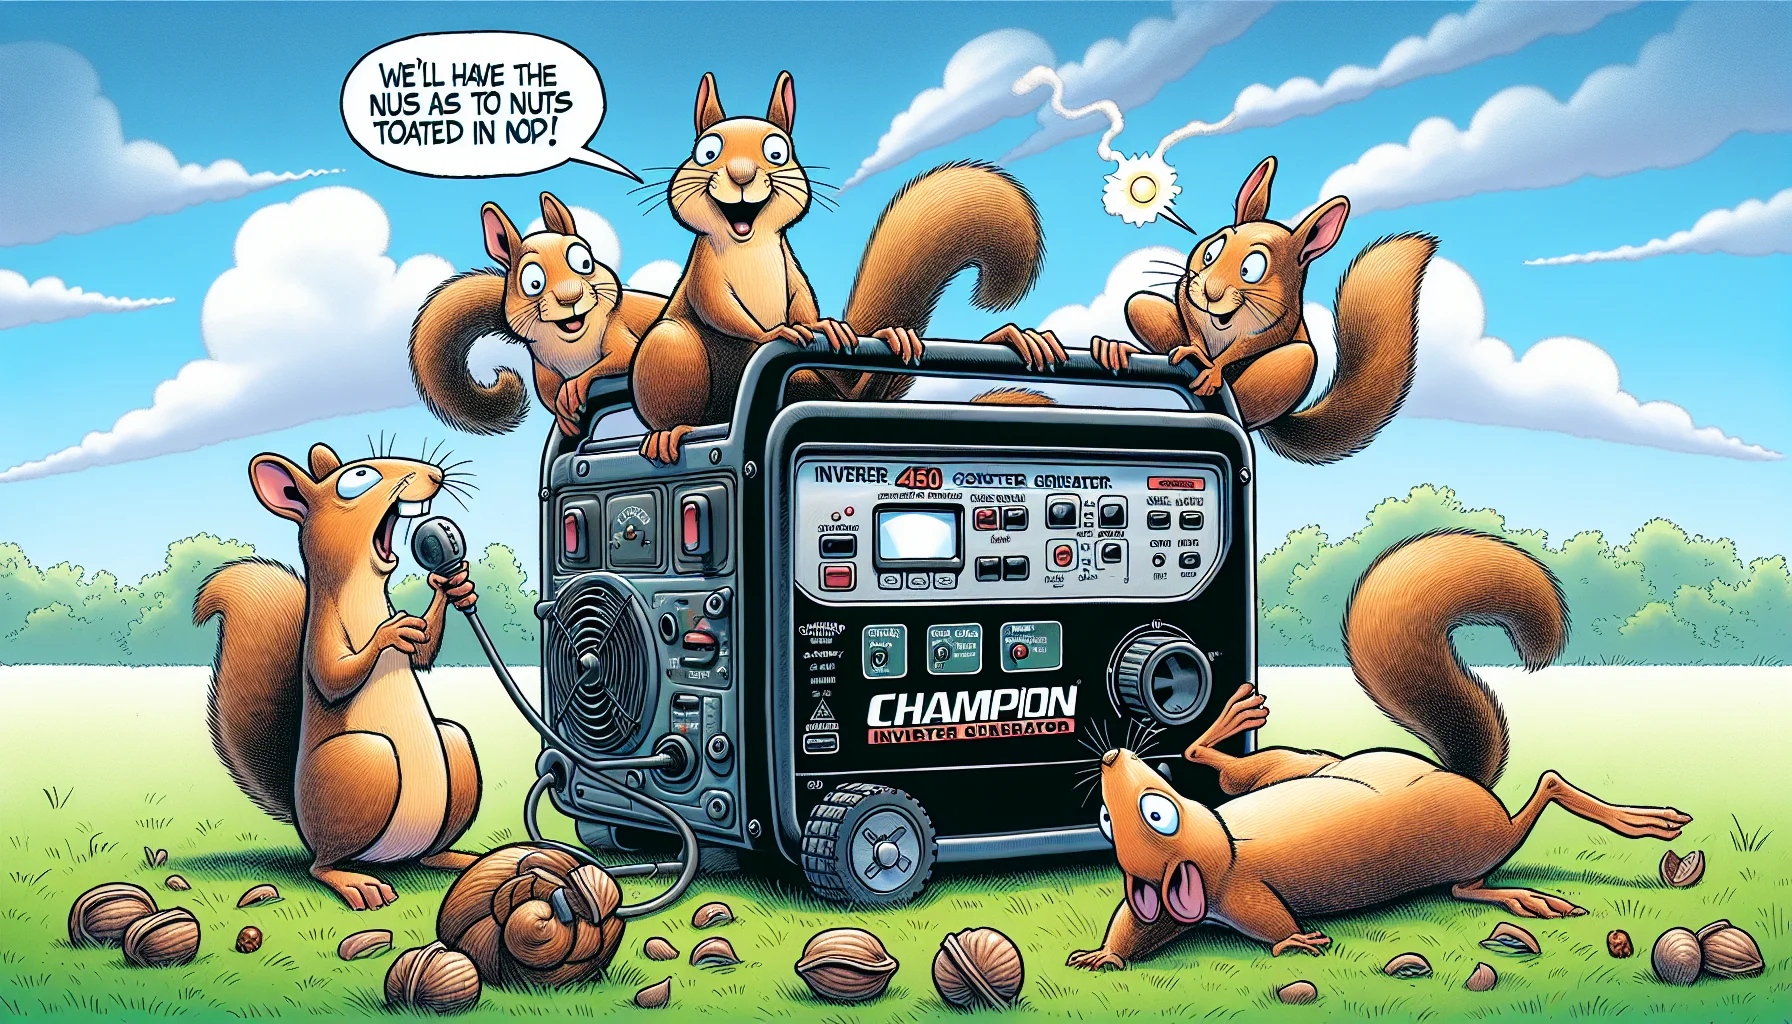 Illustrate a humorous scene involving a Champion 4500 Inverter Generator. Set the scene outdoors with a clear blue sky overhead and the generator stationed on lush green grass. A group of squirrels, each characteristically different in appearance, are huddled around the generator. One curious squirrel is peeking through the control panel, another is trying to climb onto it, and a third squirrel, donning a pair of sunglasses, is lounging leisurely beside it. A speech bubble from the lounging squirrel reads, 'We'll have the nuts toasted in no time!' The scene should evoke a playful and entertaining mood enticing people about the prospect of generating electricity.